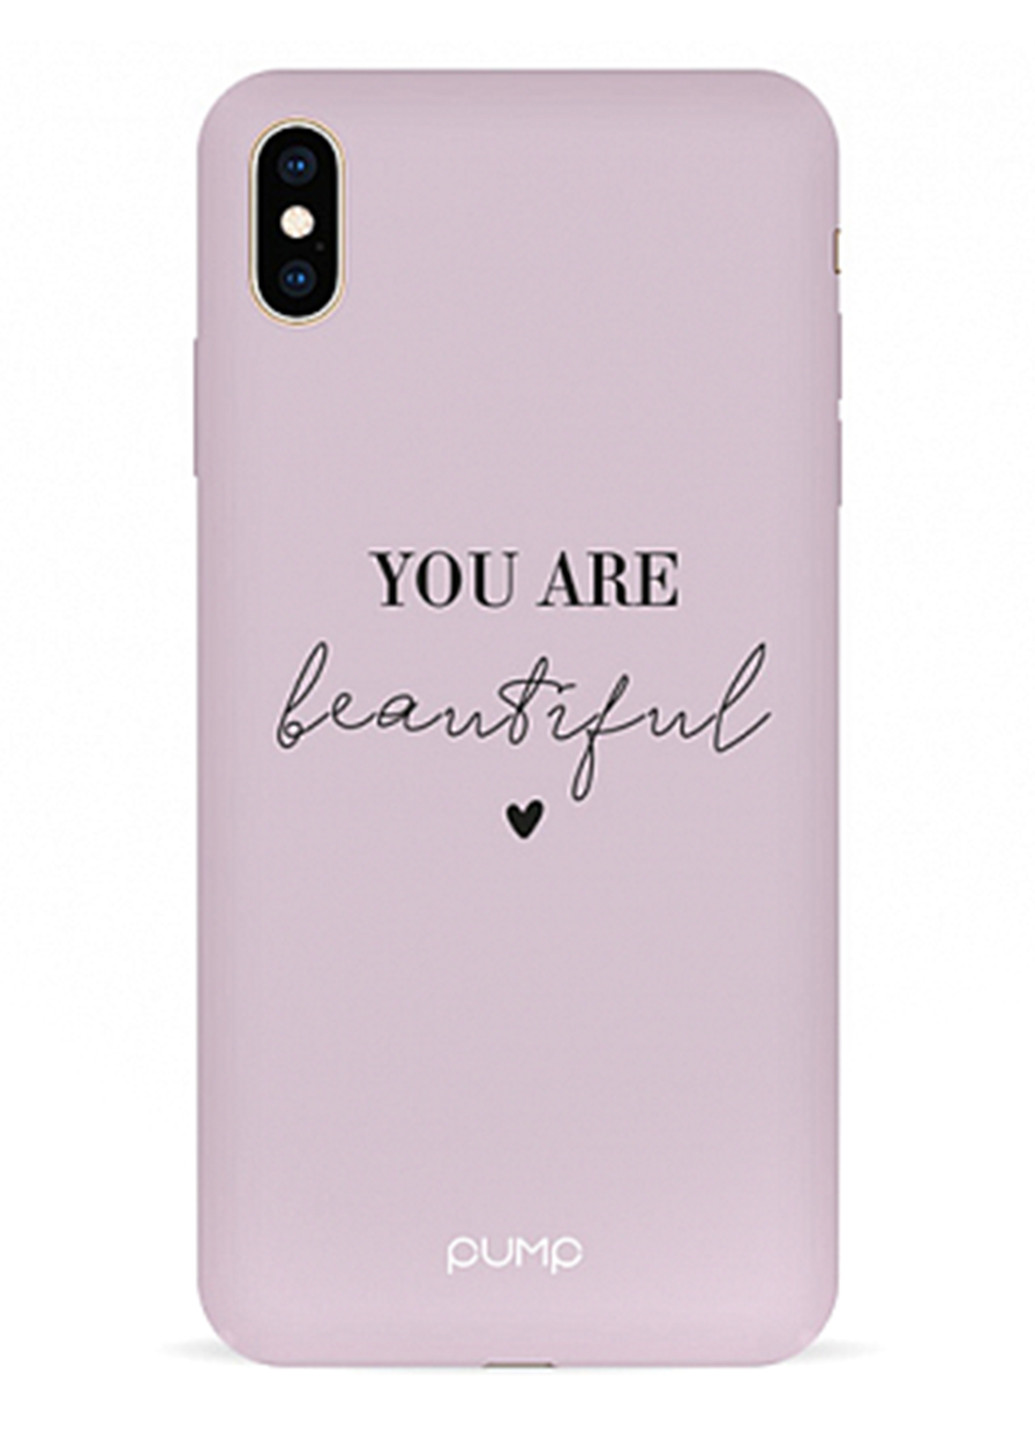 Чехол Silicone Minimalistic Case for iPhone XS Max You Are Beautiful Pump silicone minimalistic case для iphone xs max you are beautiful (137138799)